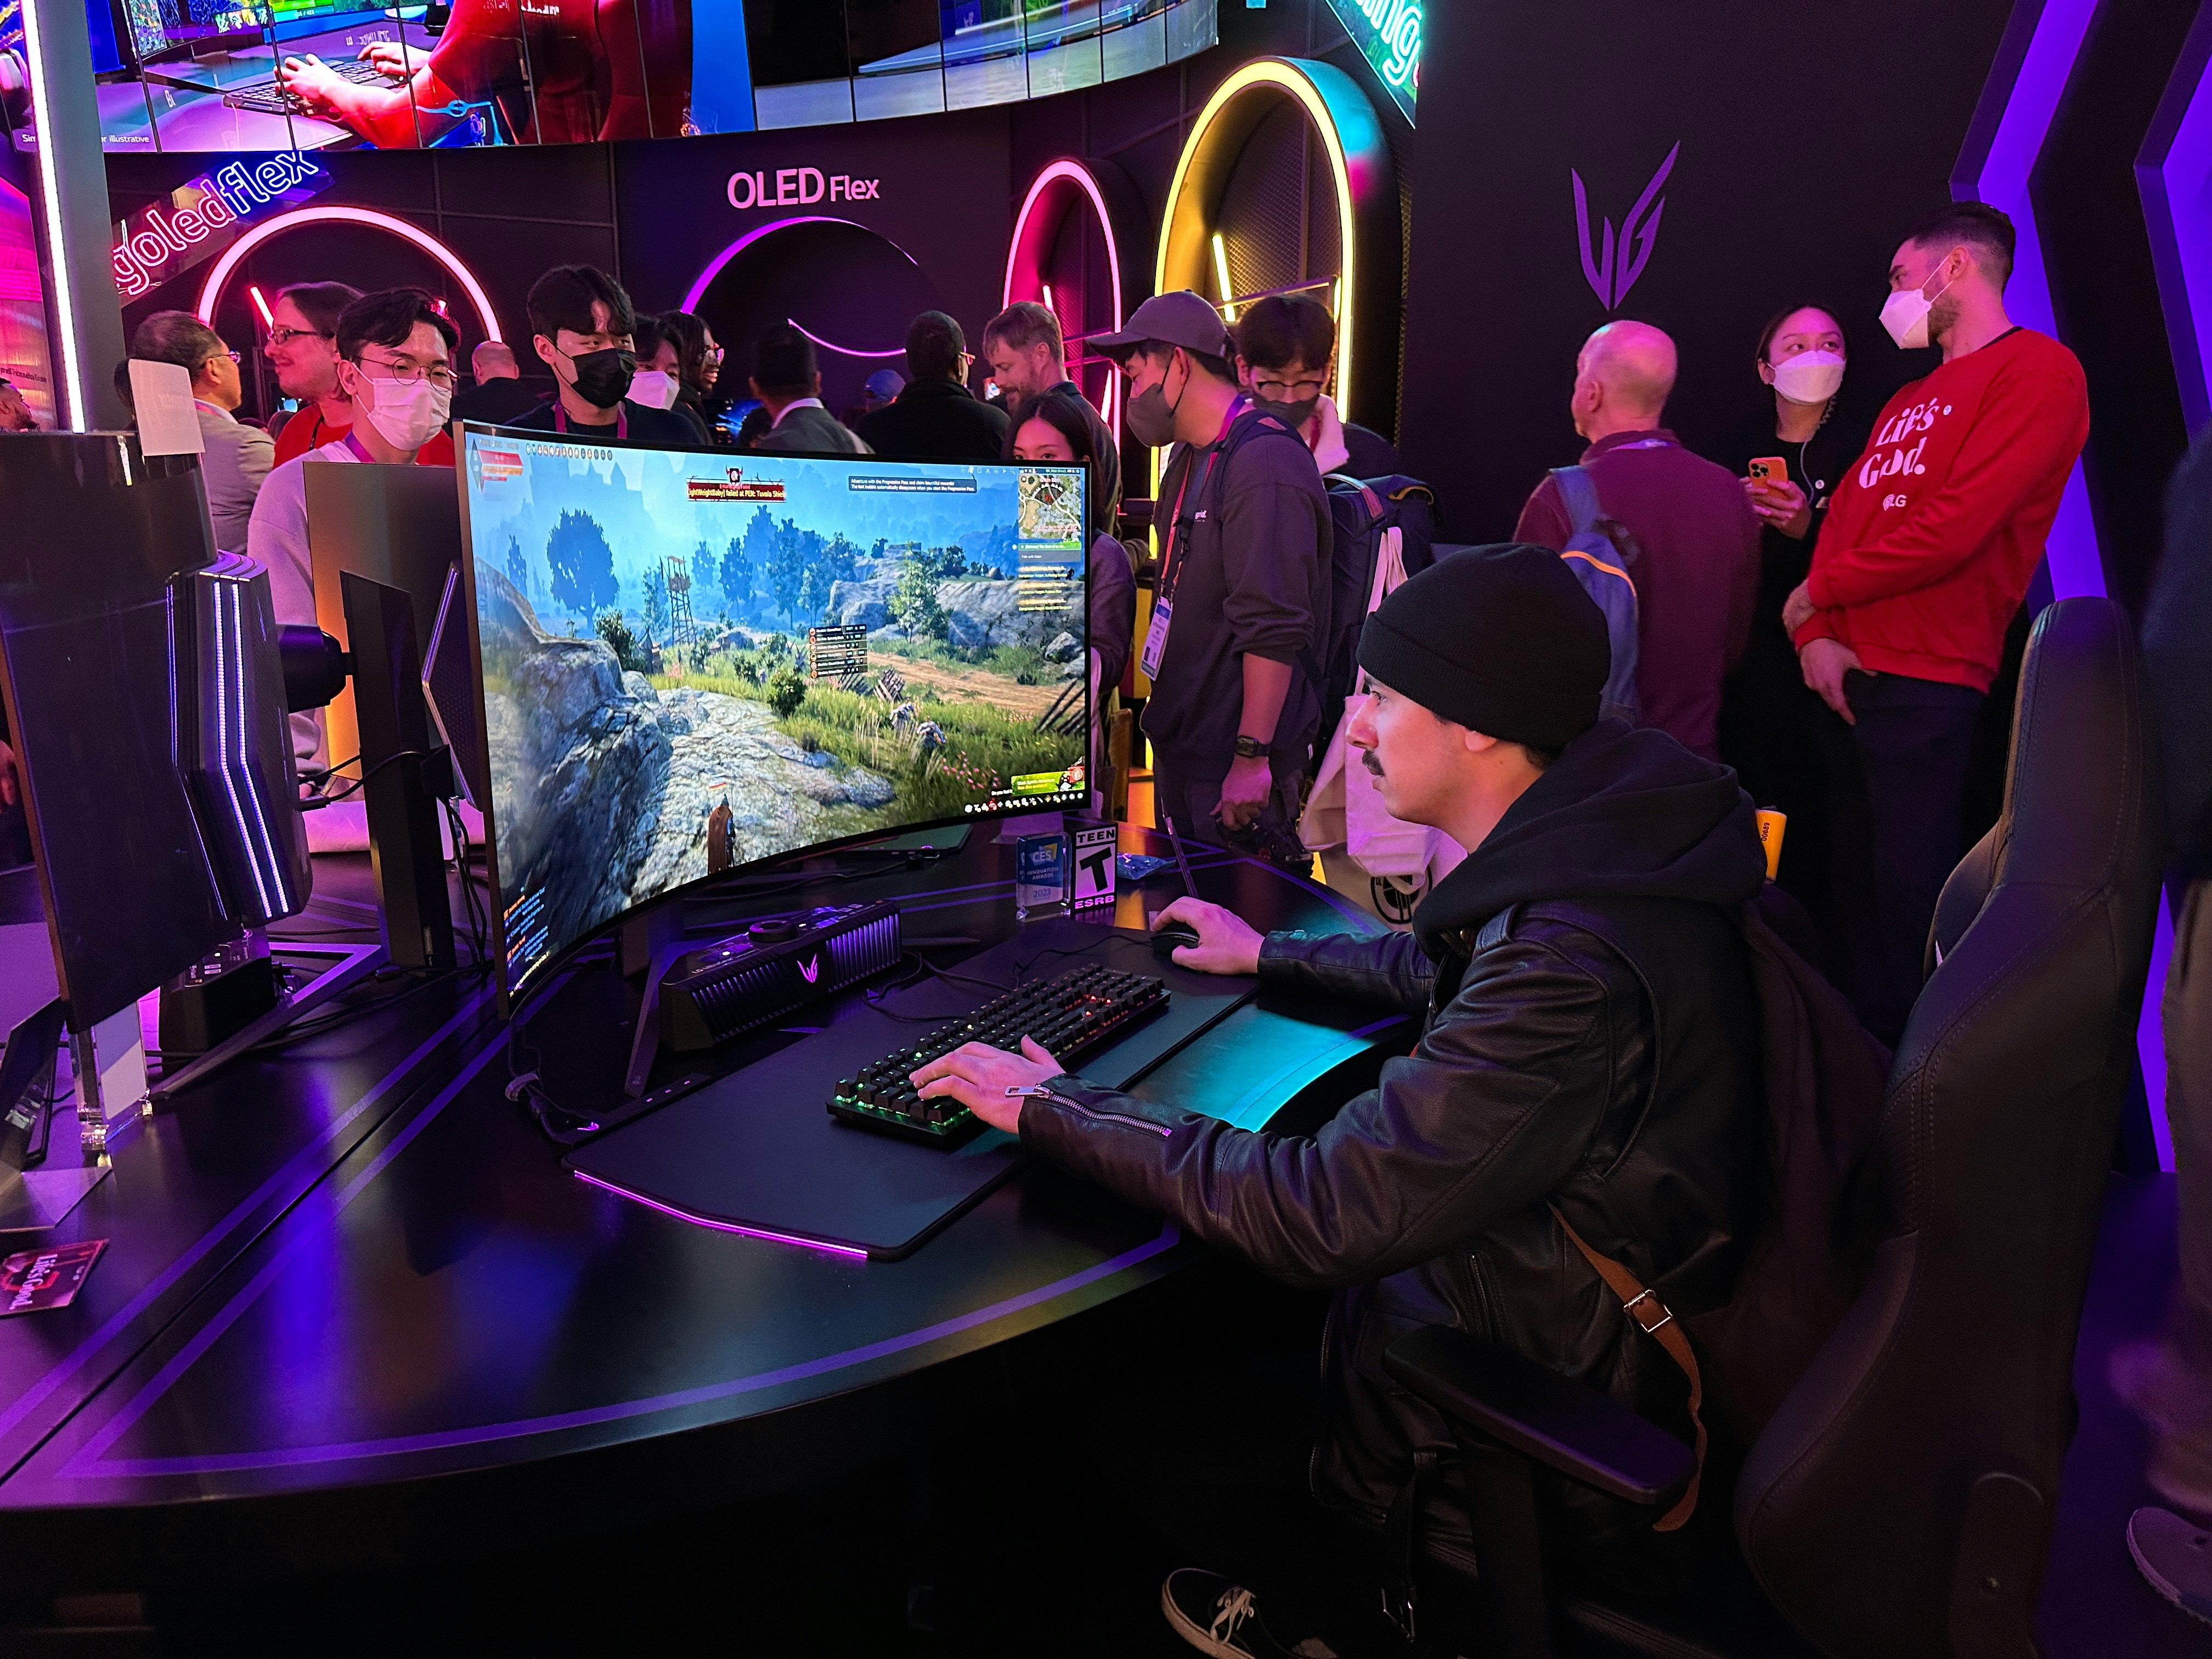 New LG UltraGear Gaming Monitors Play in OLED at 240Hz - CNET